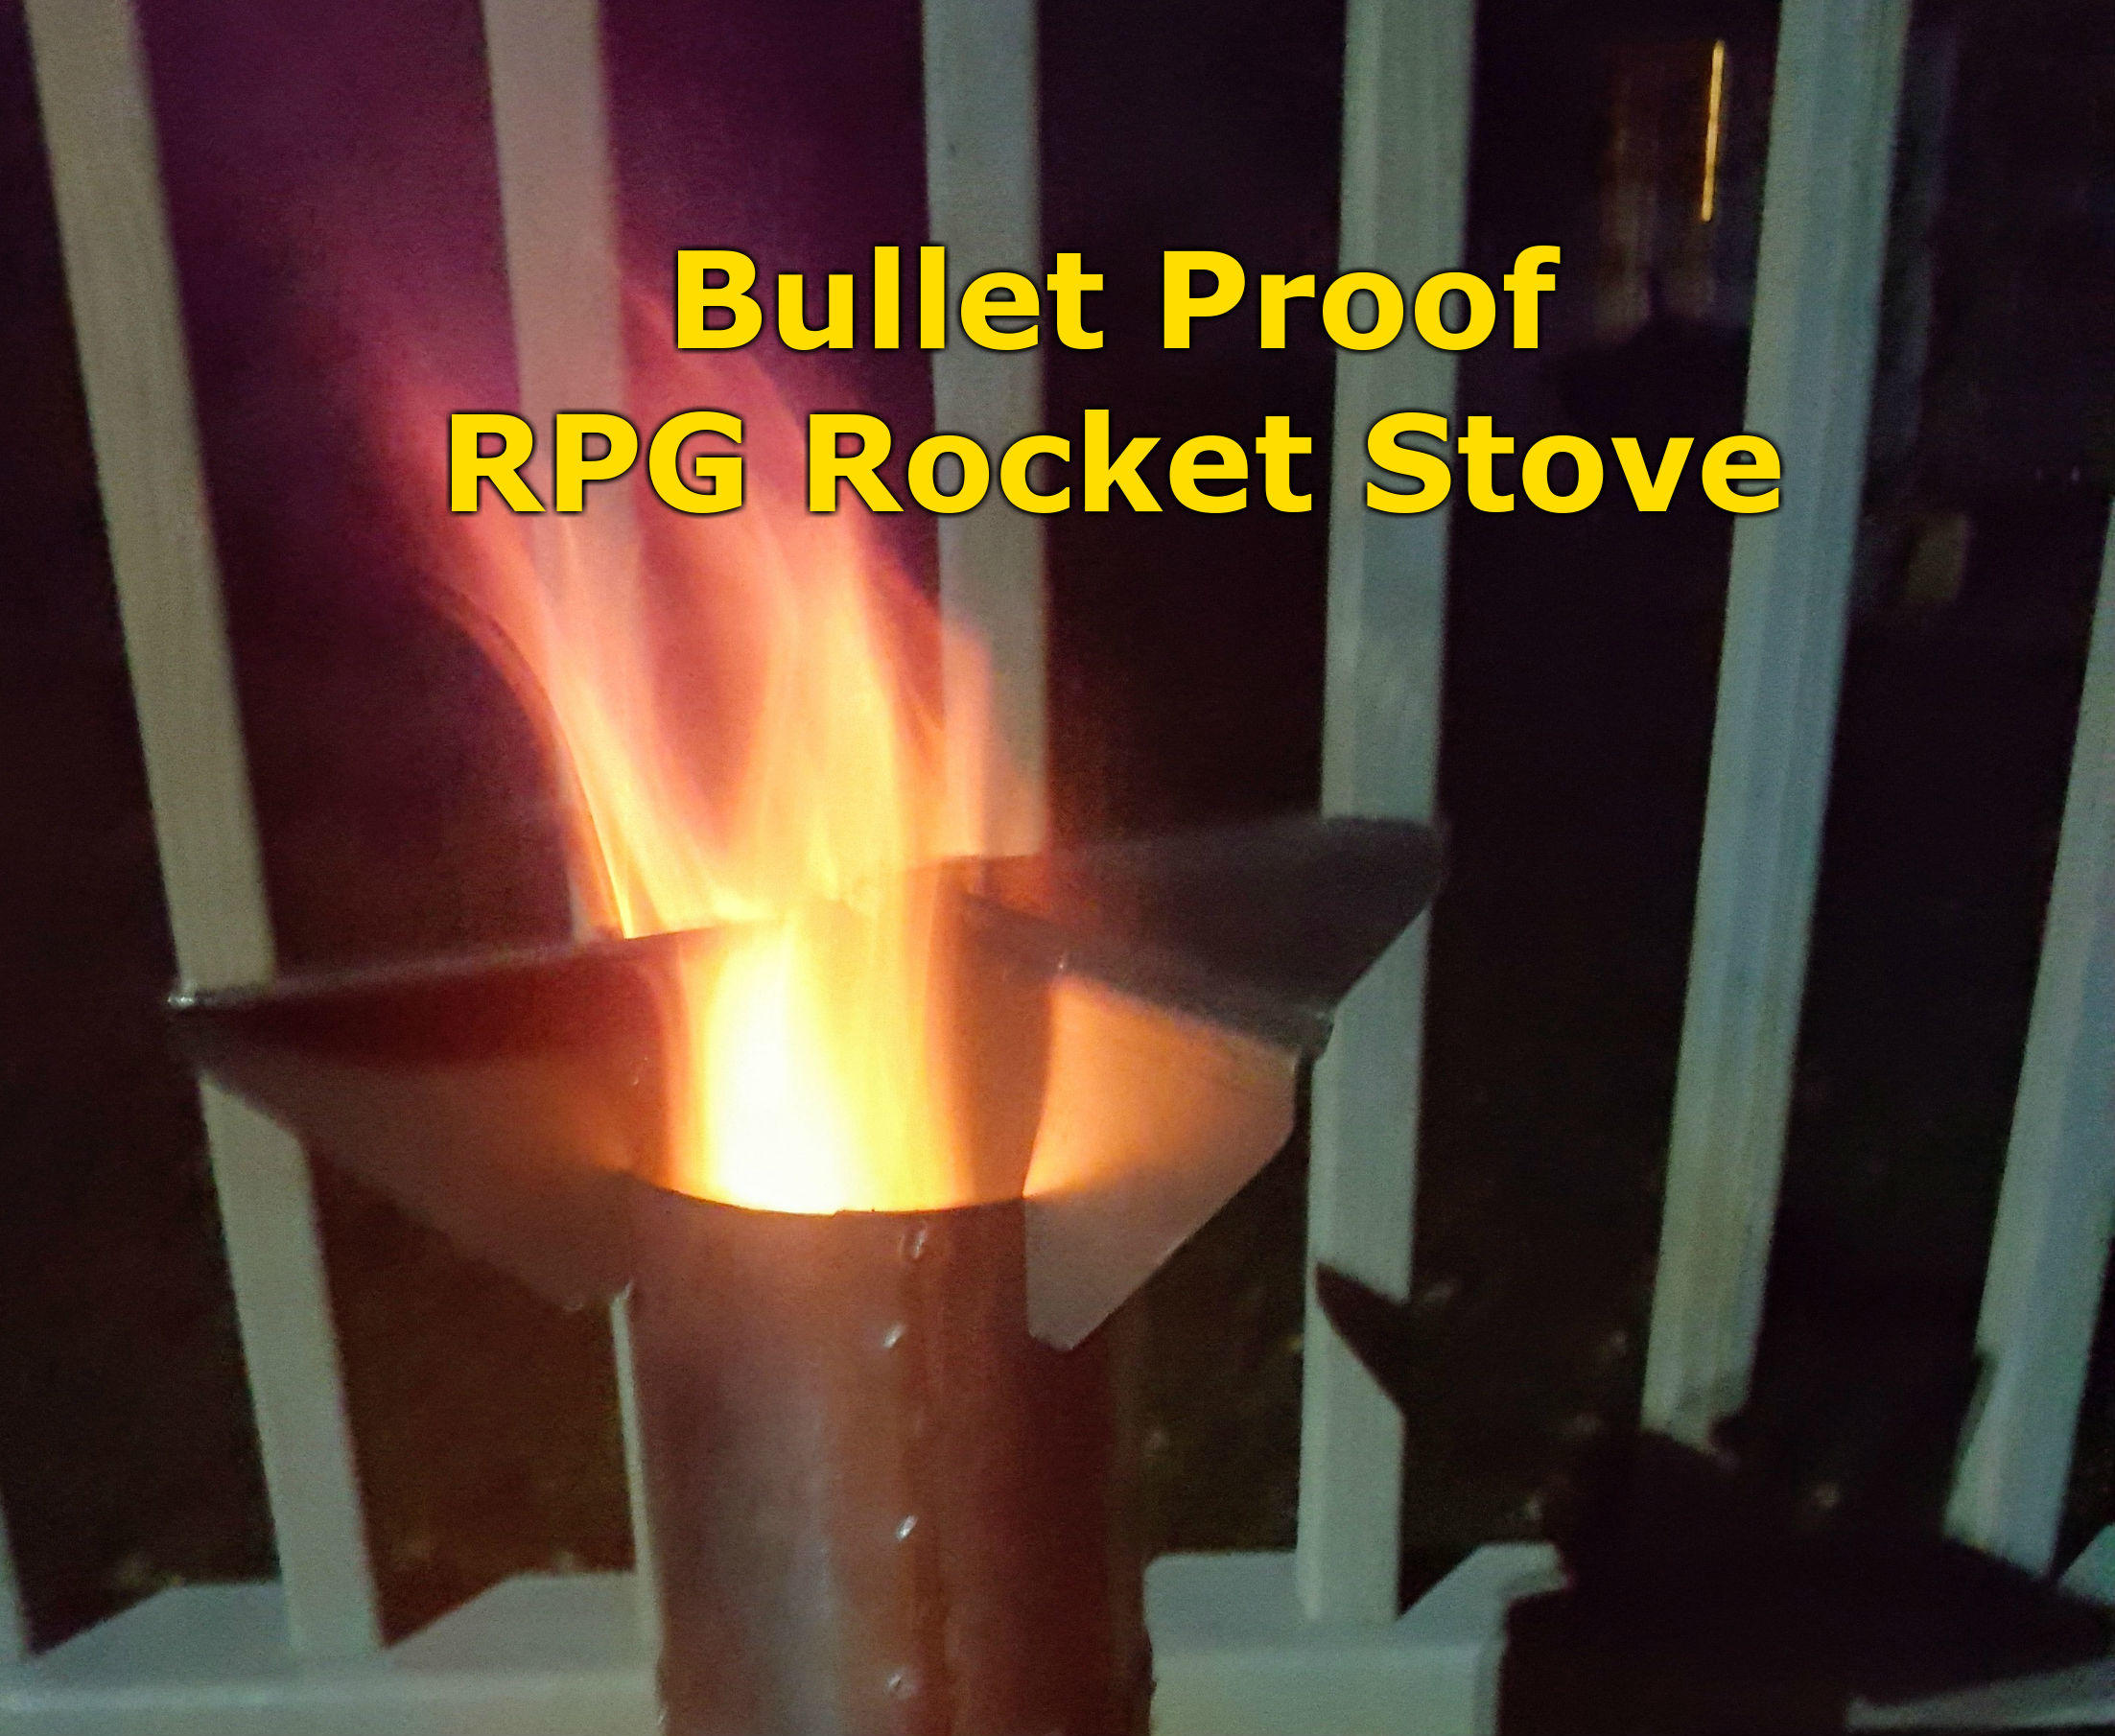 Bullet Proof RPG Rocket Stove and Emergency Heater